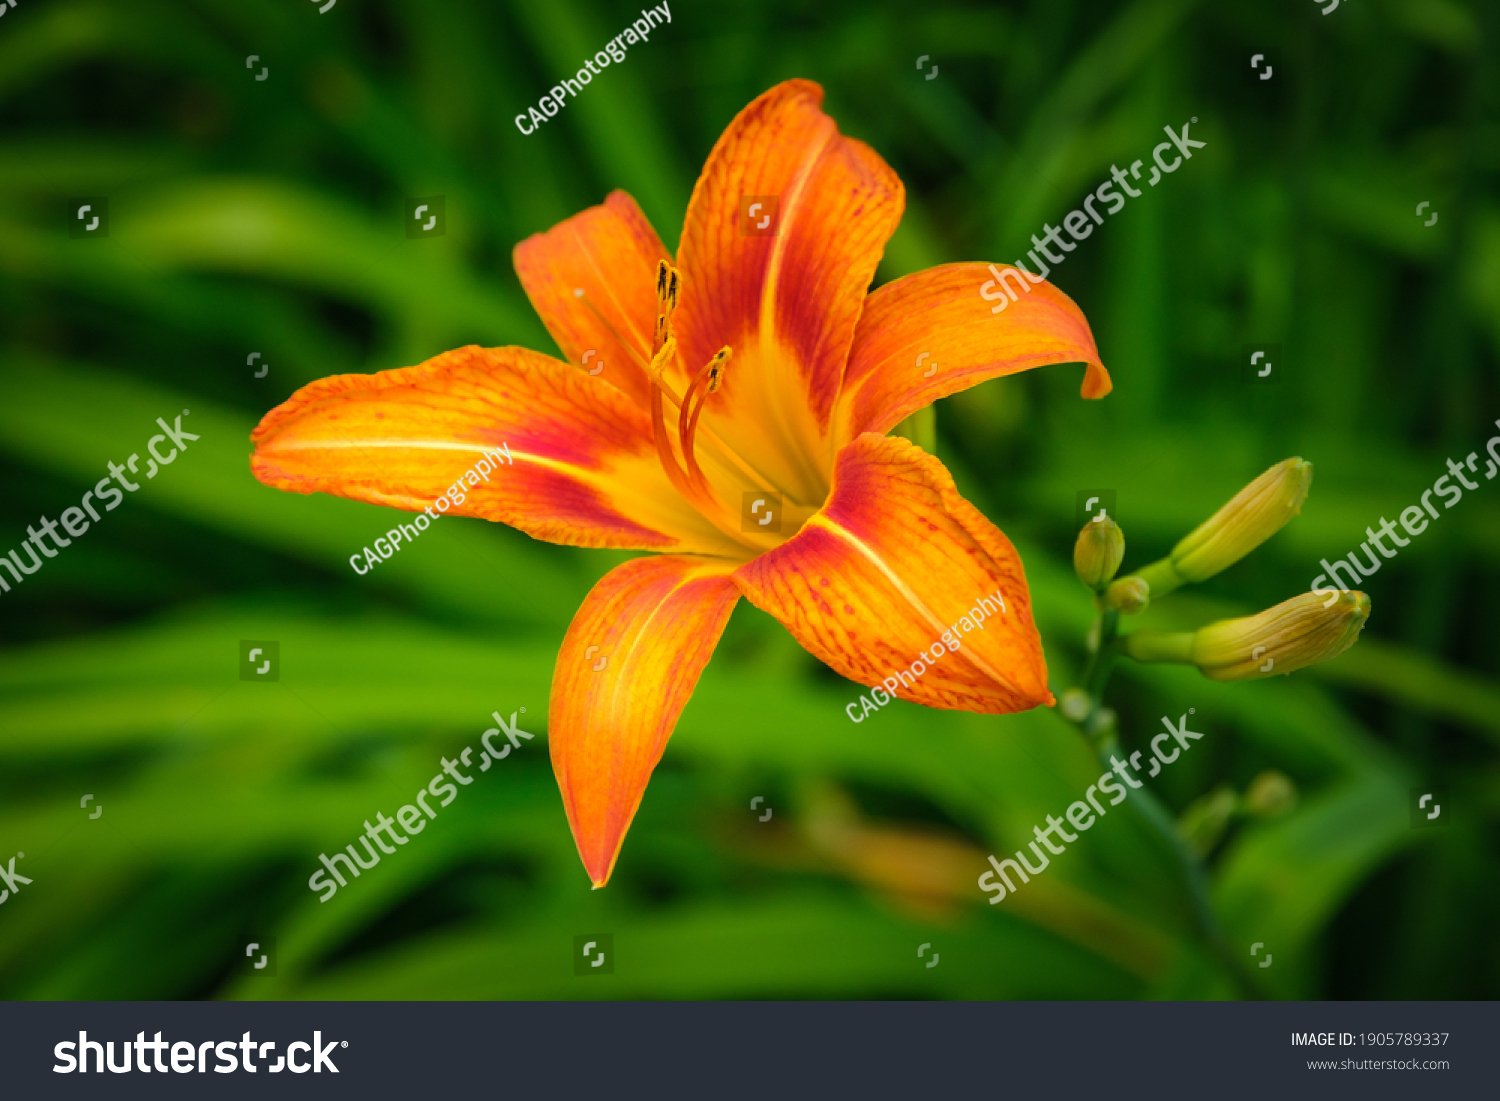 Close up of a single Orange Lilly or Tiger Lilly flower against tall green grasses in spring #1905789337